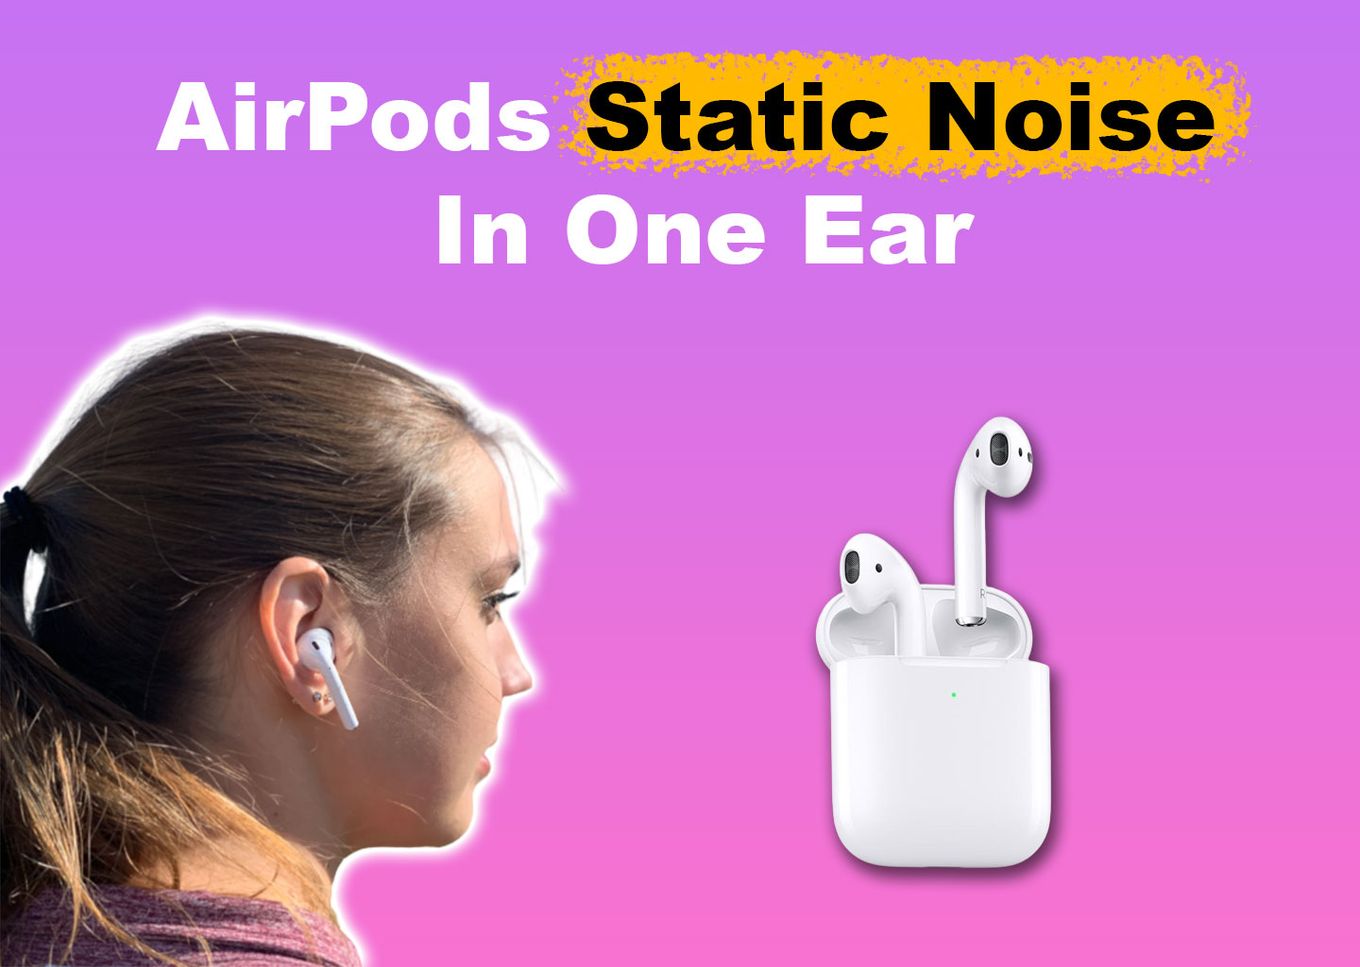 AirPods static noise in one ear